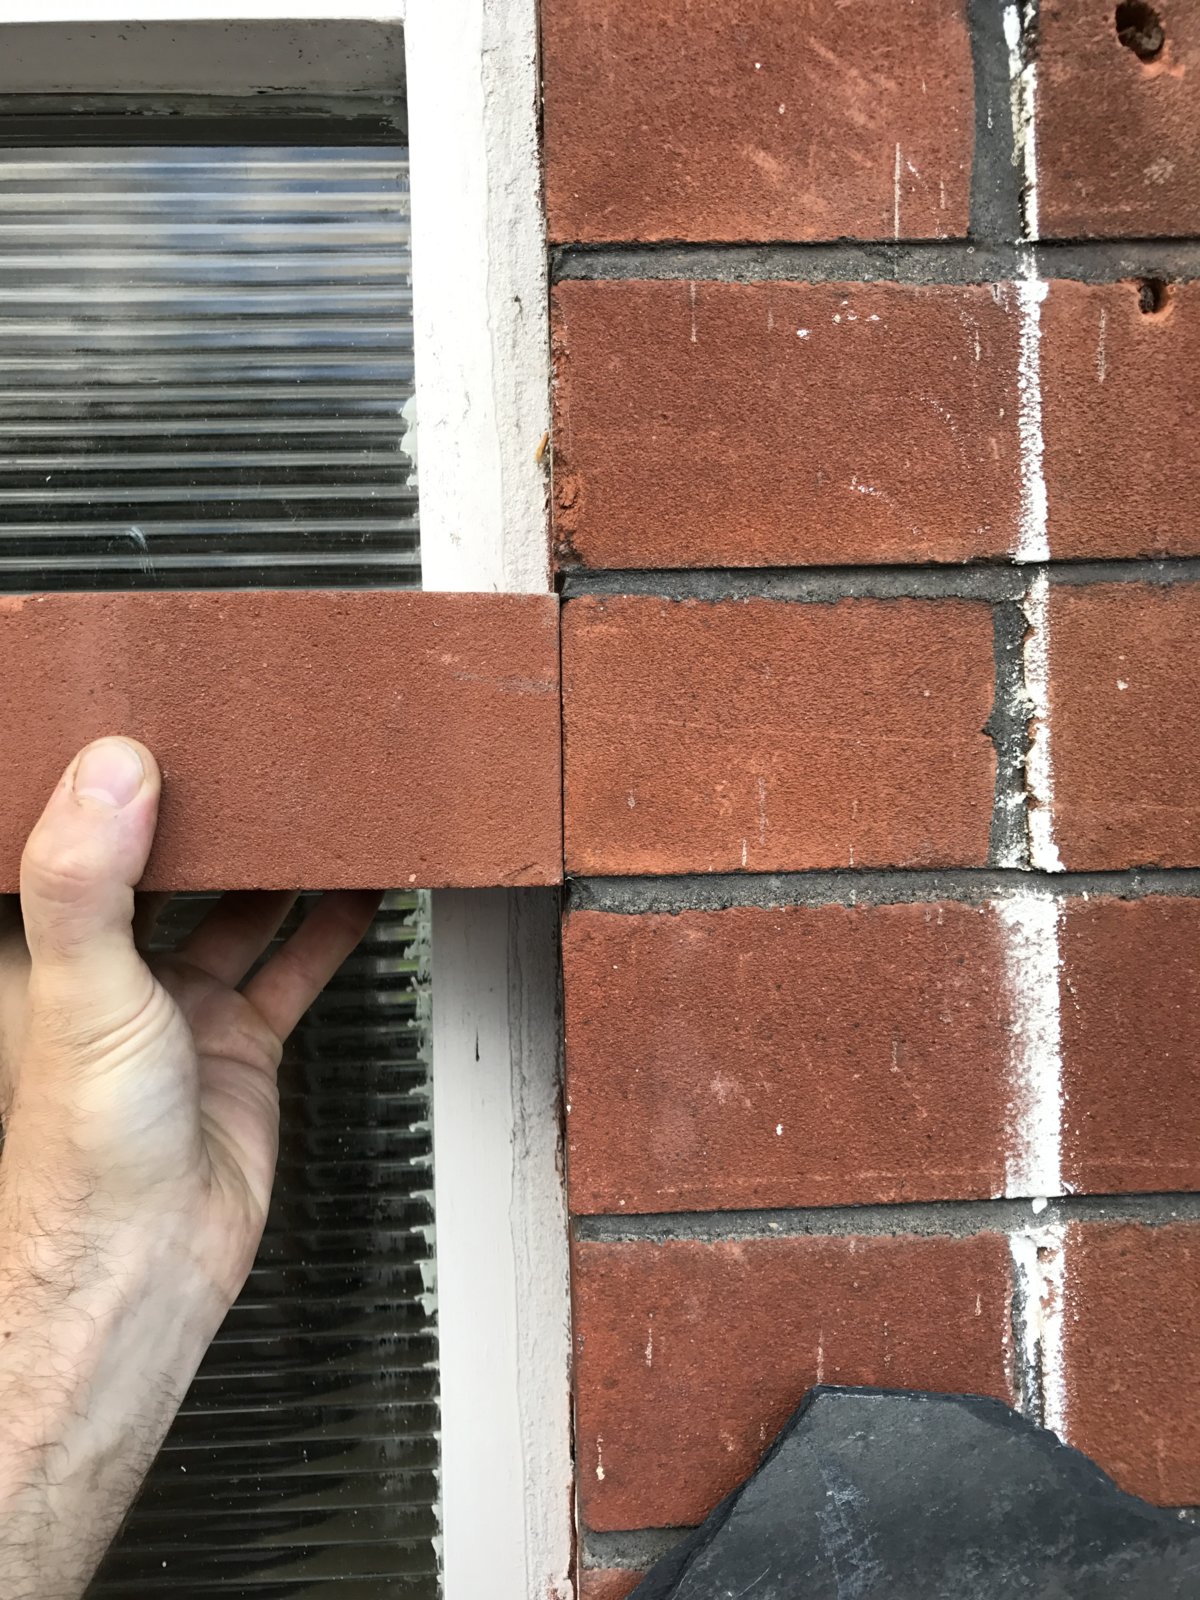 How long does your mortar last before going off? | DIYnot Forums